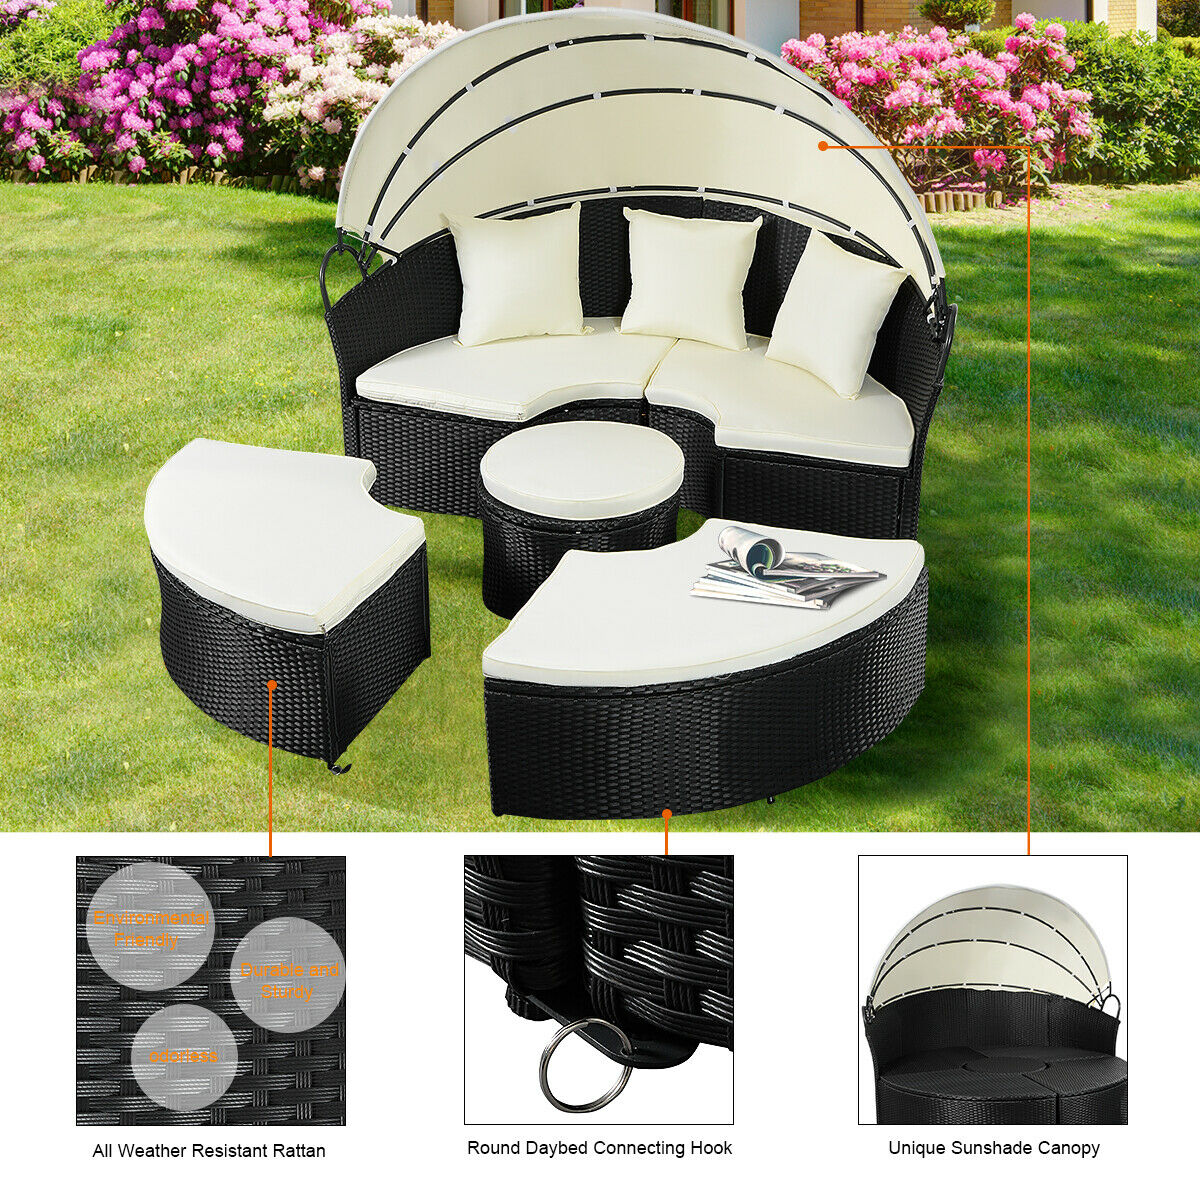 Costway Daybed Patio Sofa Furniture Round Retractable Canopy Wicker Rattan Outdoor - image 2 of 10